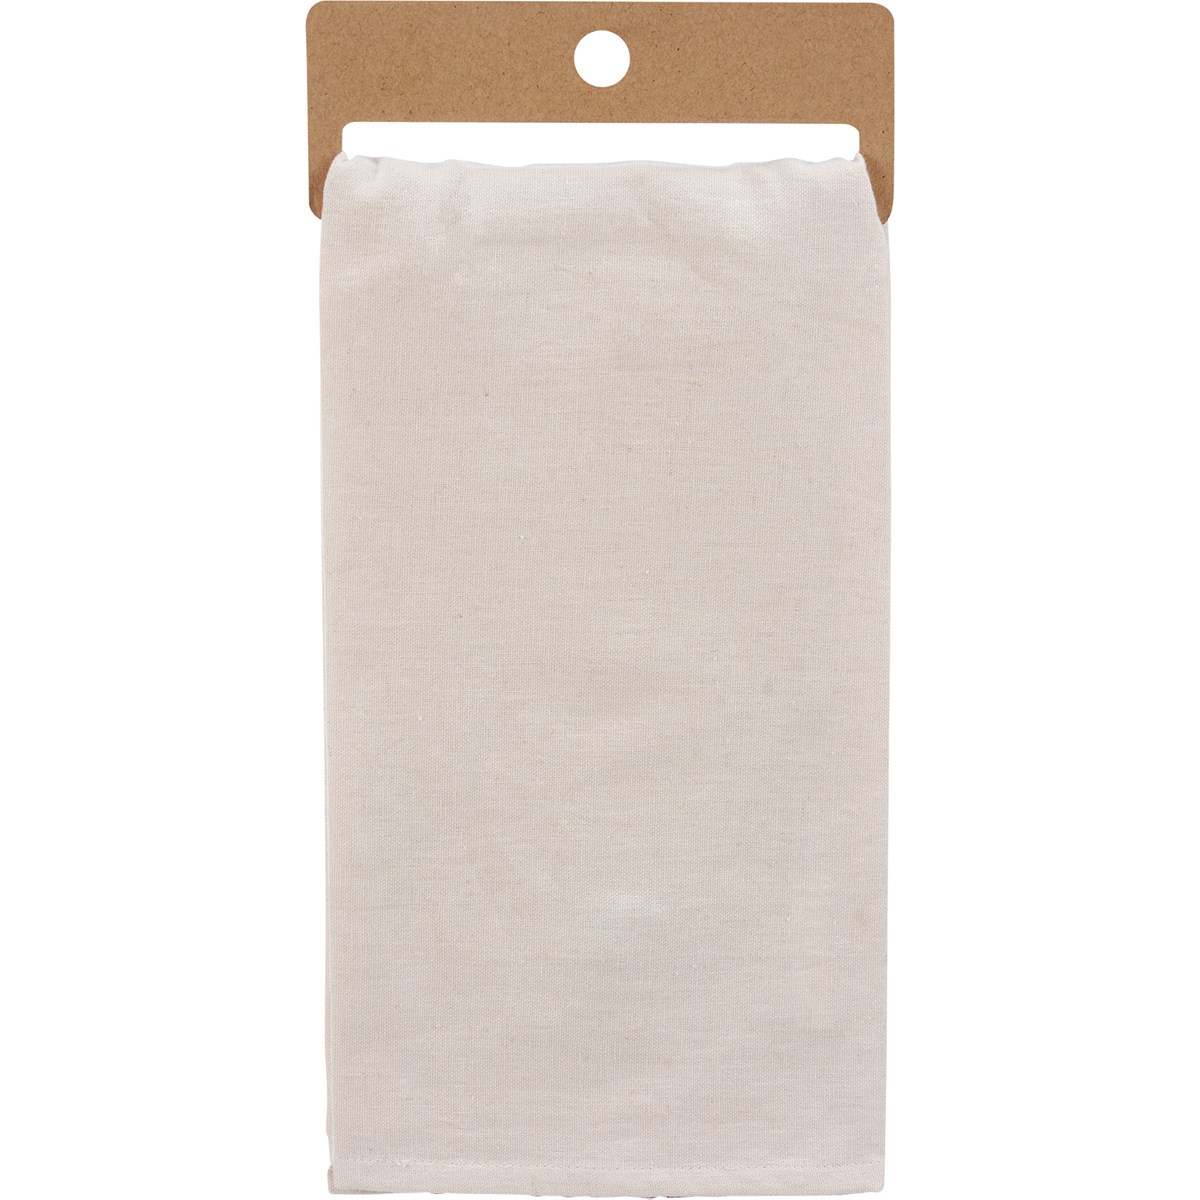 Stay Awhile Kitchen Towel - Cotton, Linen